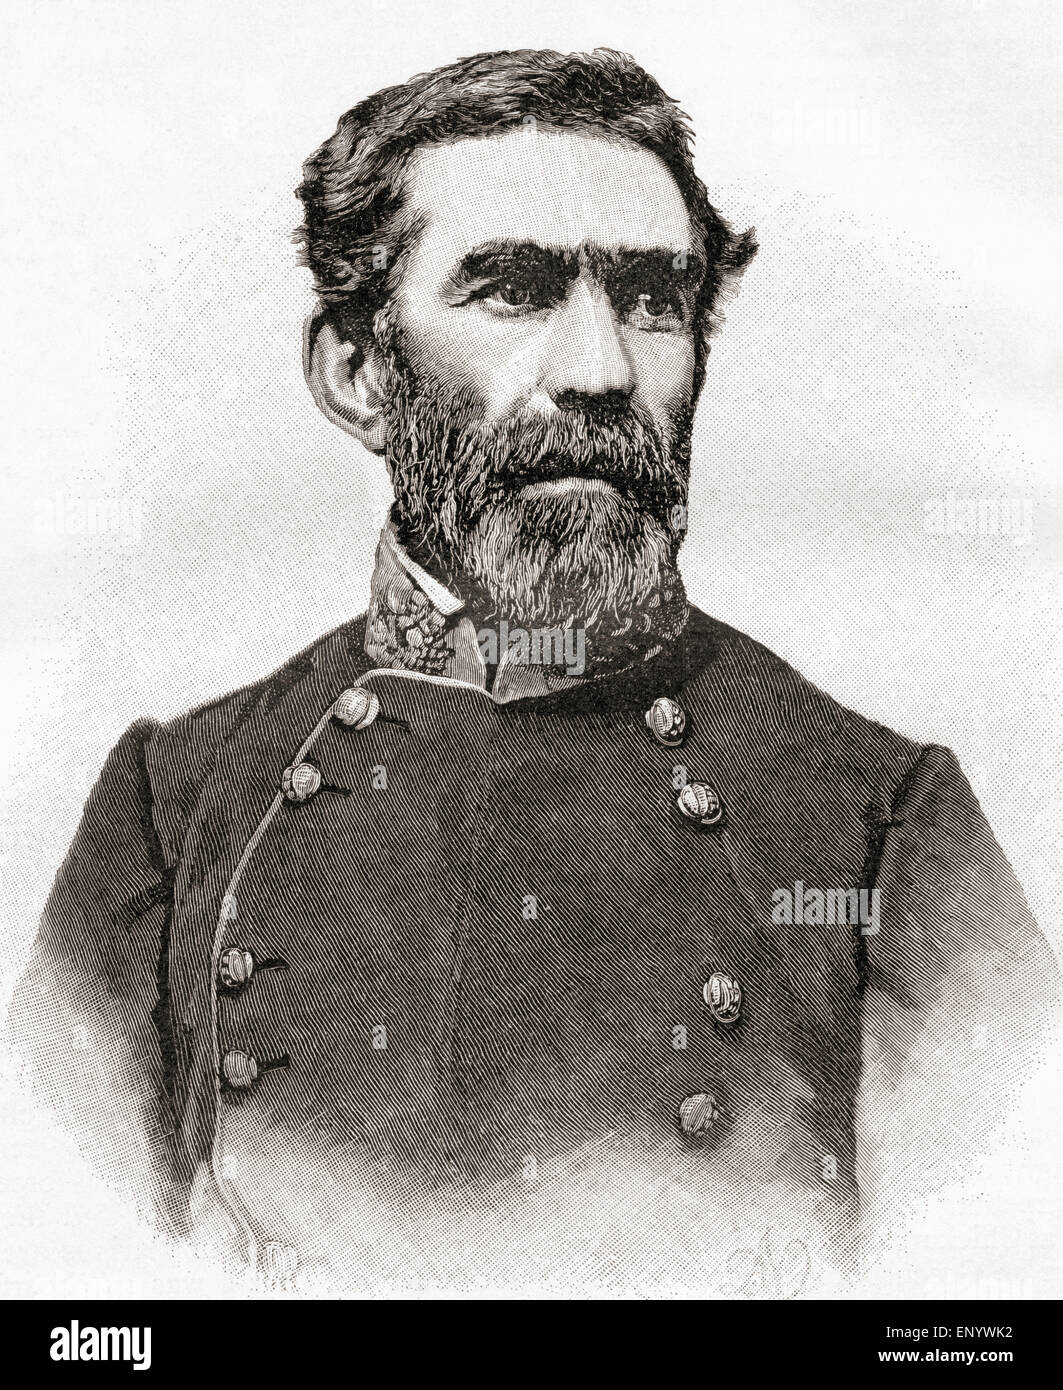 General Braxton Bragg,  1817 –1876.  Career United States Army officer, and general in the Confederate States Army  He was a principal commander in the Western Theater of the American Civil War. Stock Photo